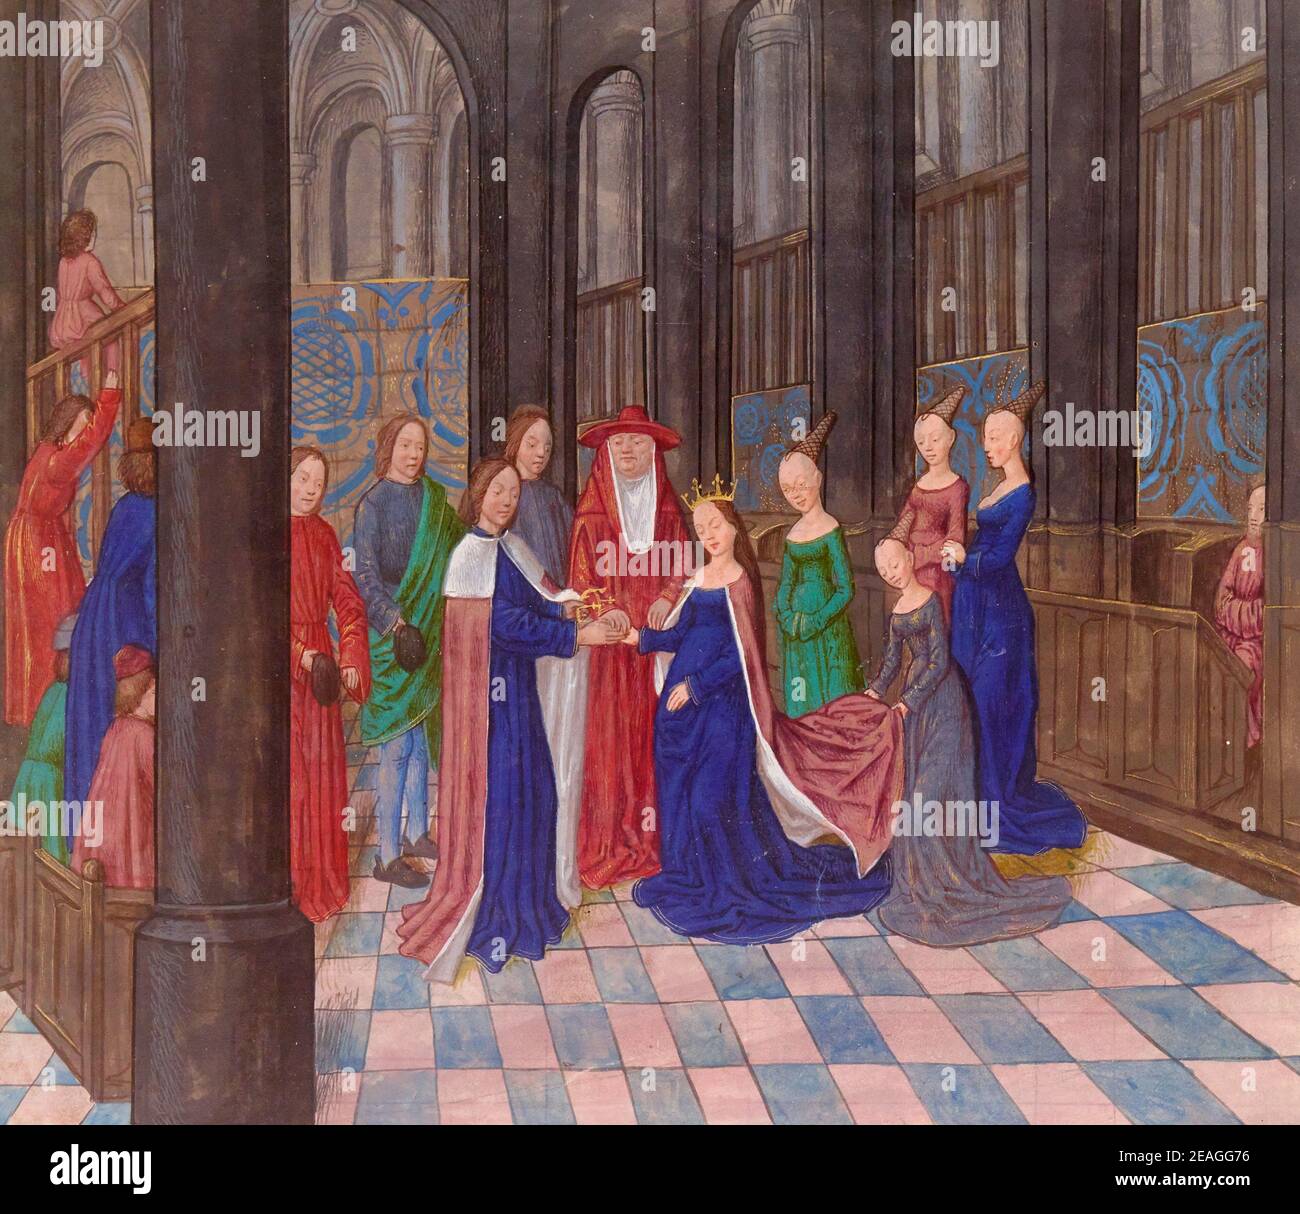 The marriage of Edward IV and Elizabeth Woodville, Anciennes Chroniques  d'Angleterre by Jean de Wavrin, 15th century Stock Photo - Alamy